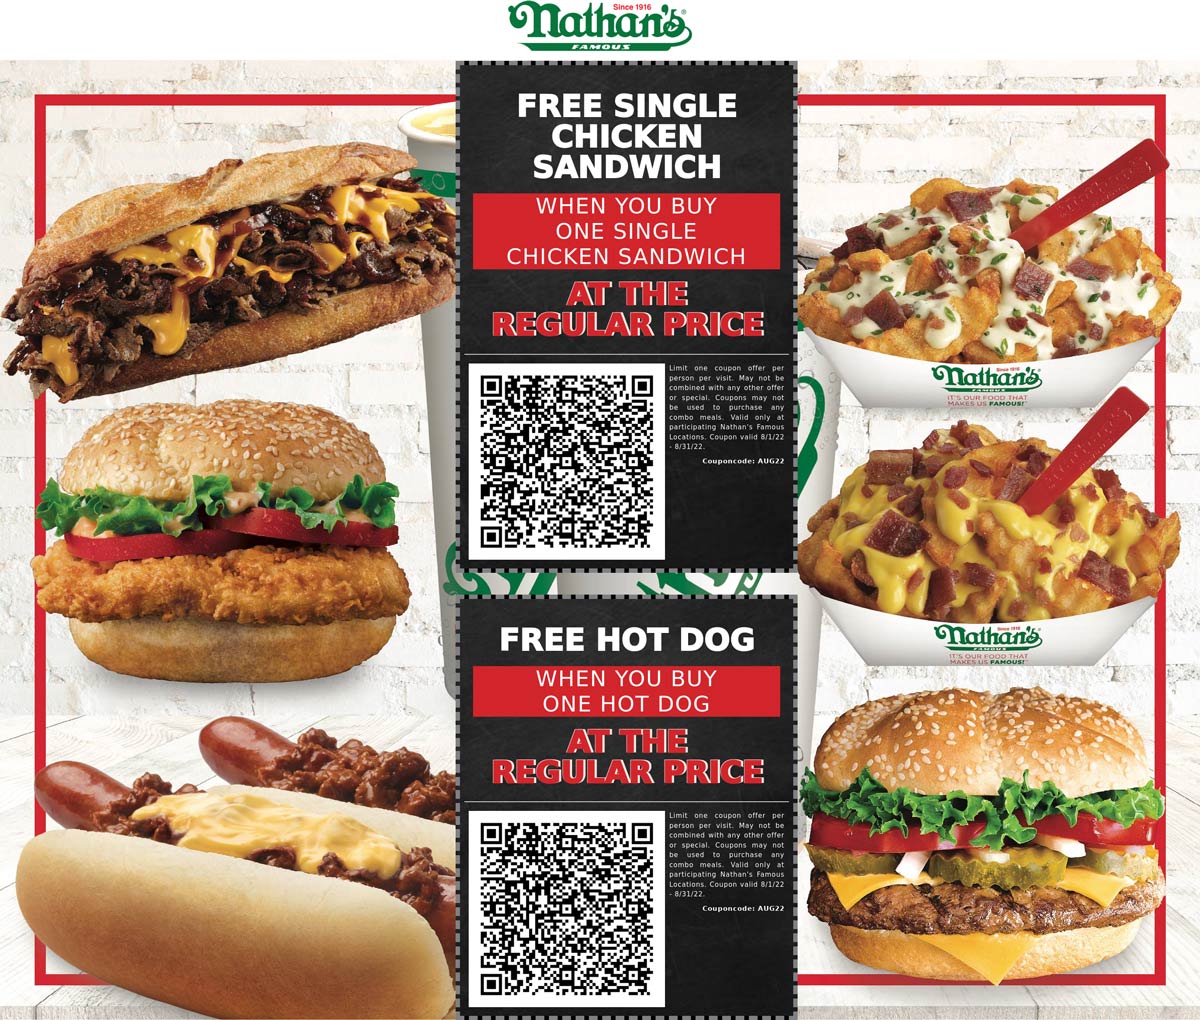 Nathans Famous restaurants Coupon  Second chicken sandwich or hot dog free at Nathans Famous #nathansfamous 